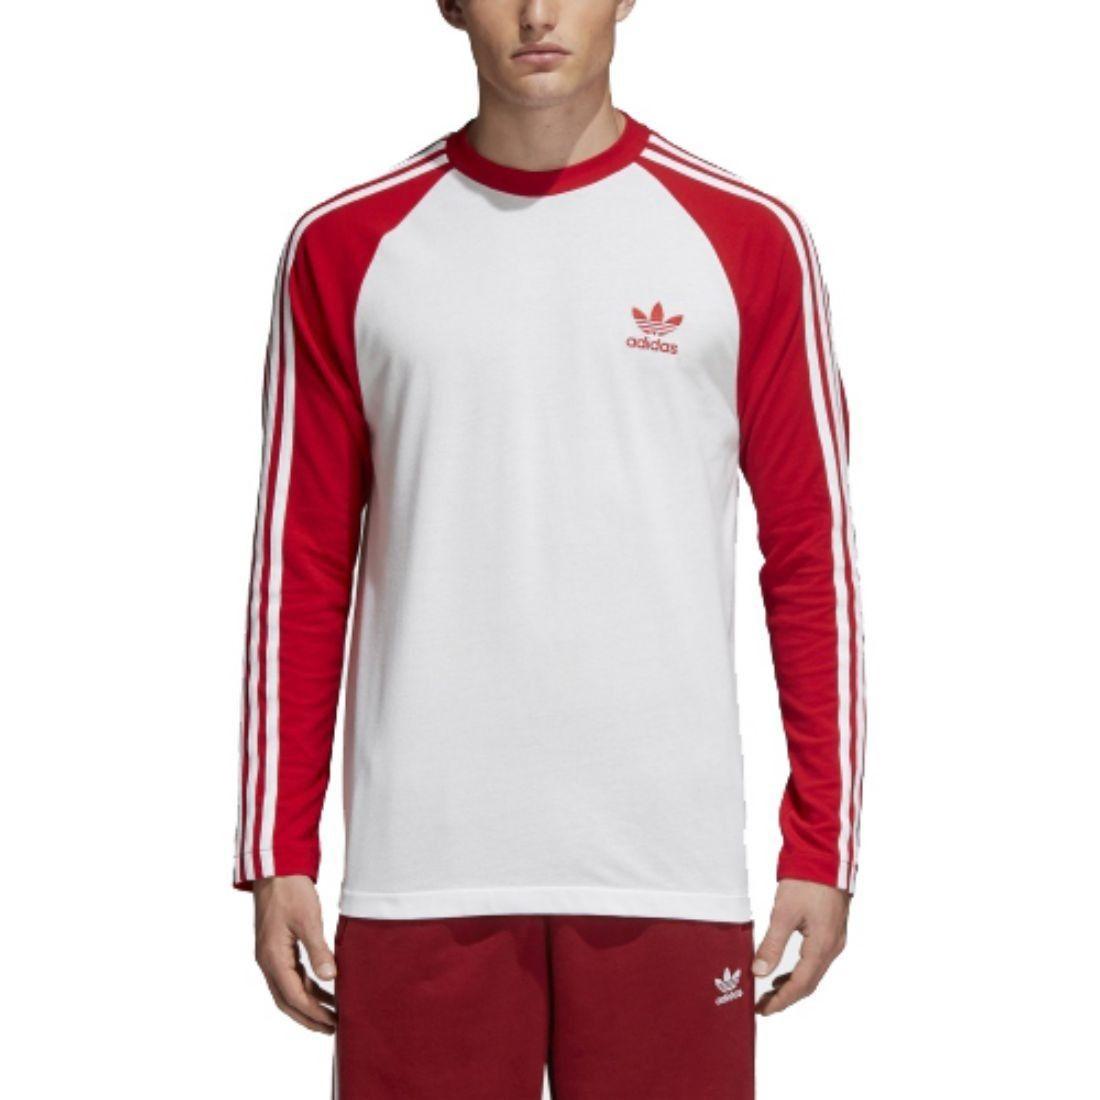 Two White Red L Logo - adidas Men's Long Sleeve 3 Stripes LS T Cw1231 White Red L